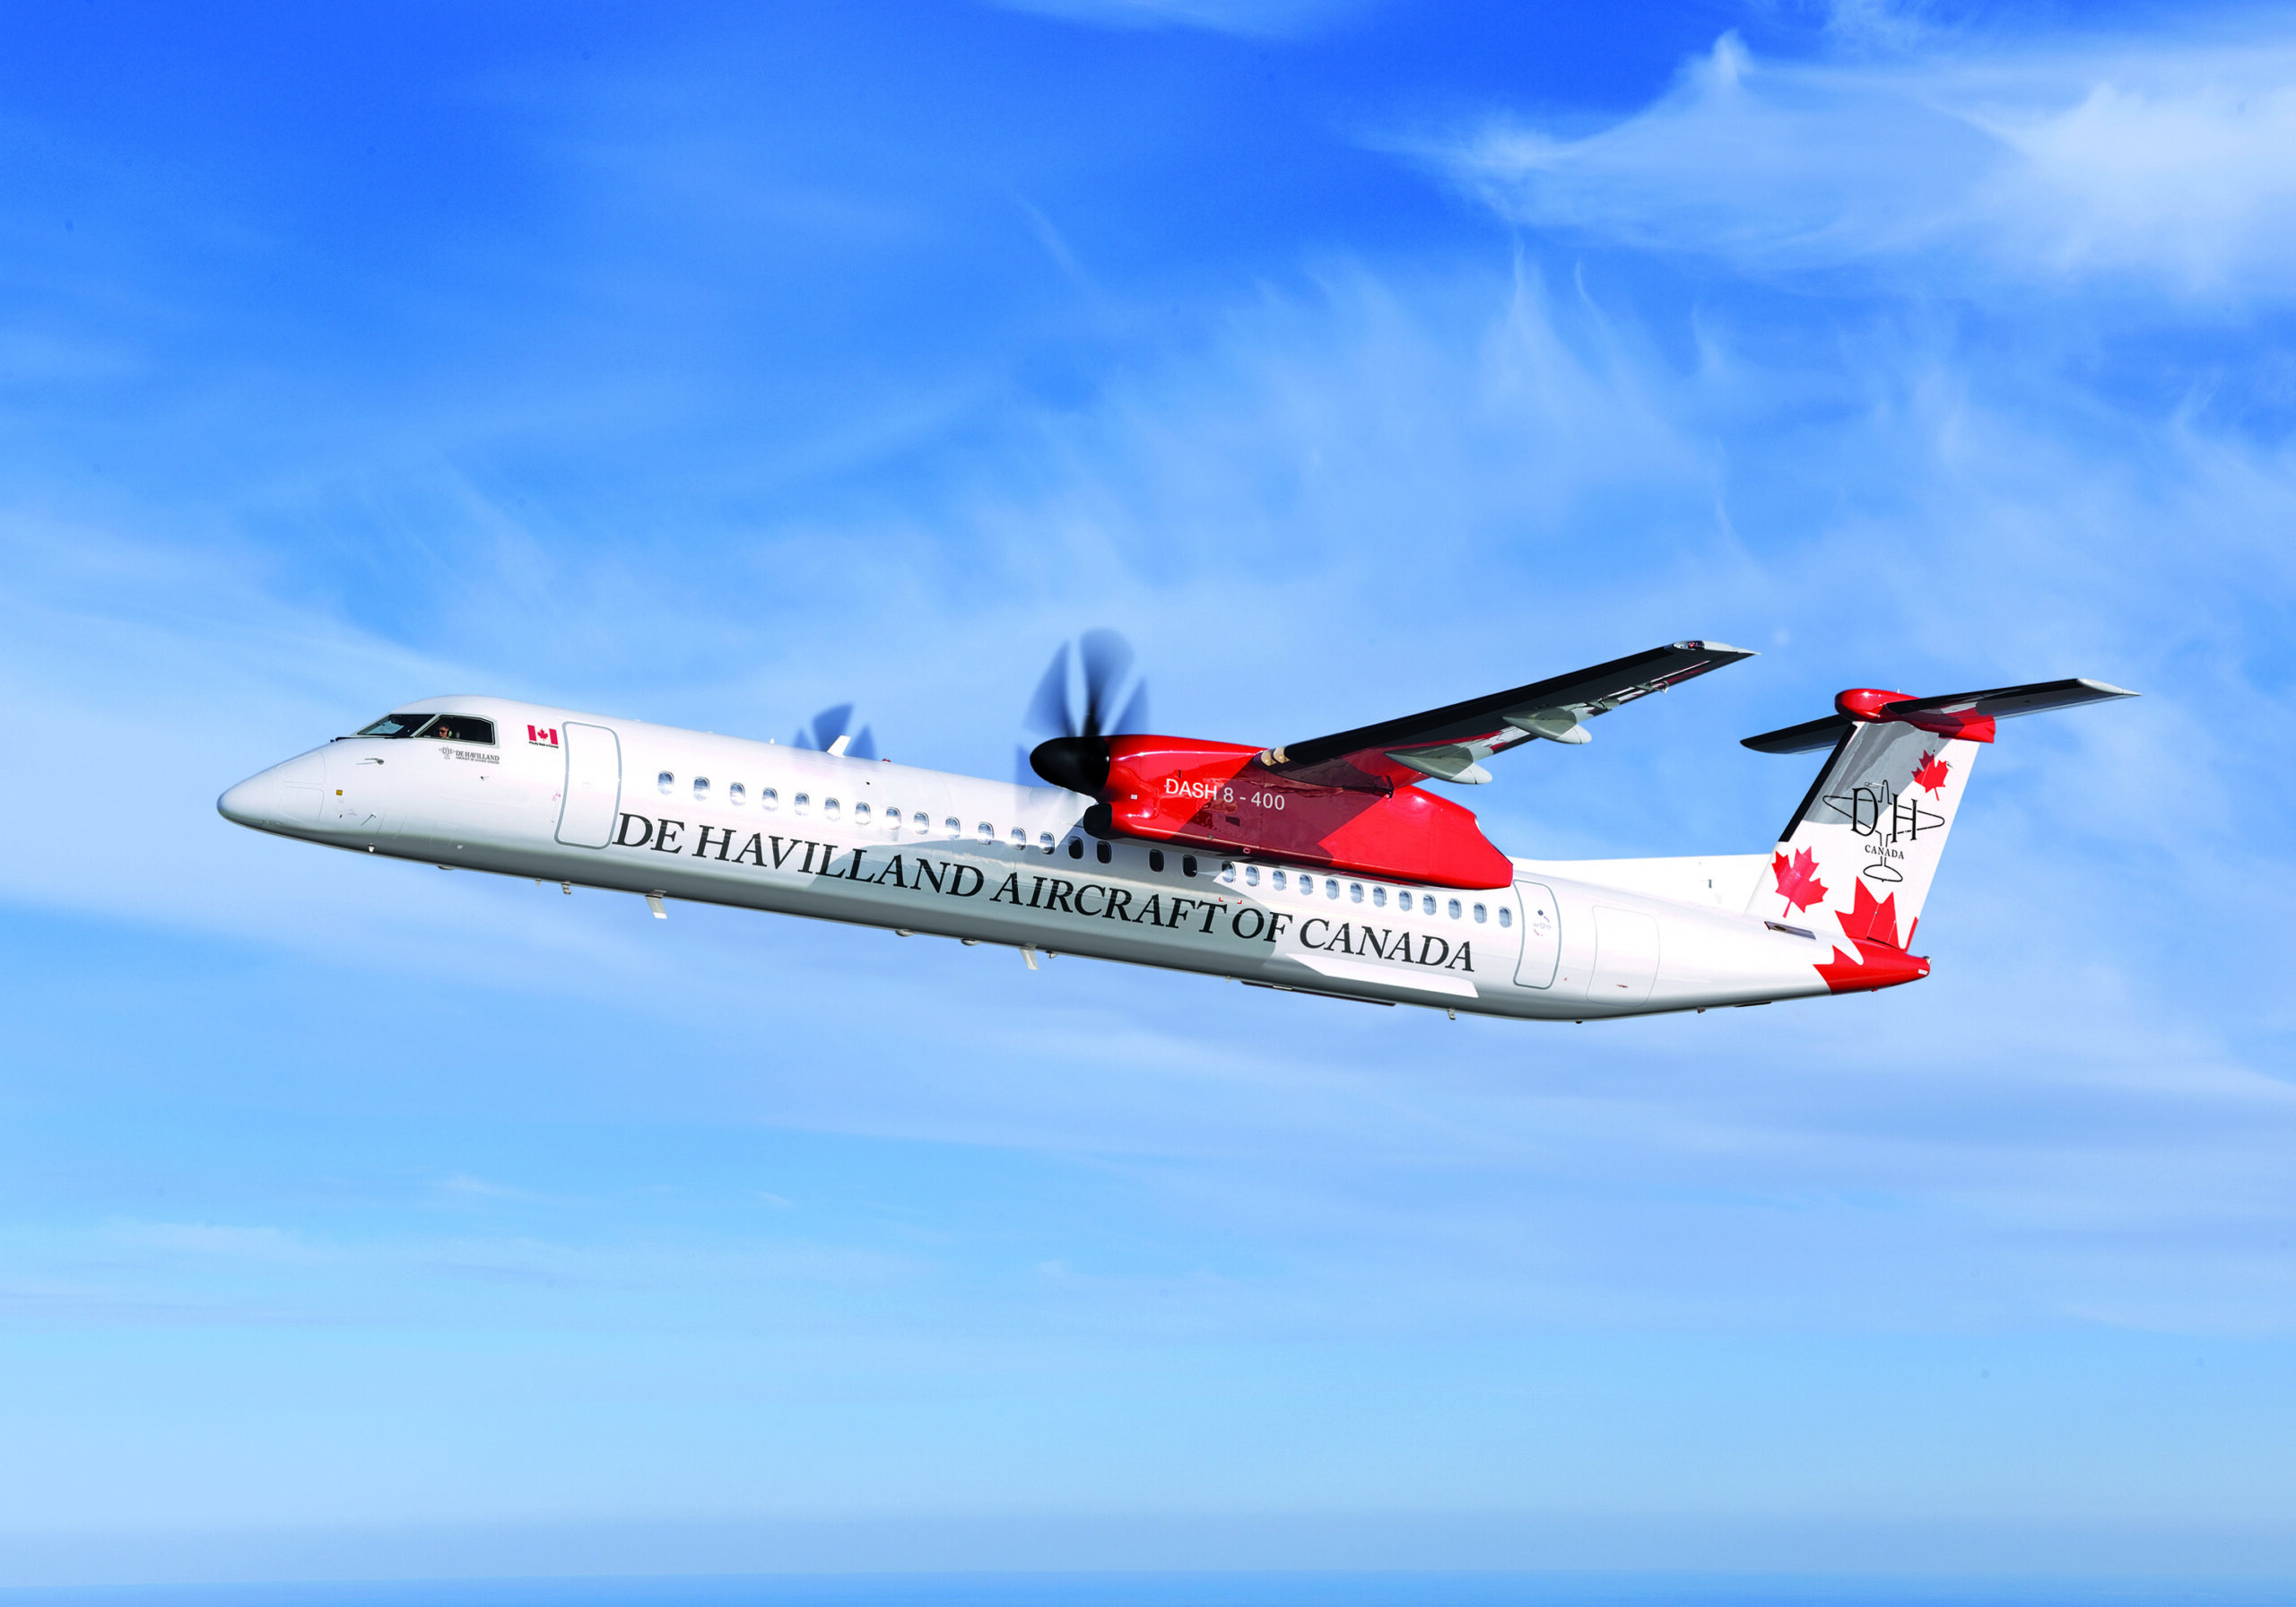 De Havilland Canada Increasing Operational Flexibility of Dash 8-400 Aircraft with Design Weight Increases and Cabin Enhancements